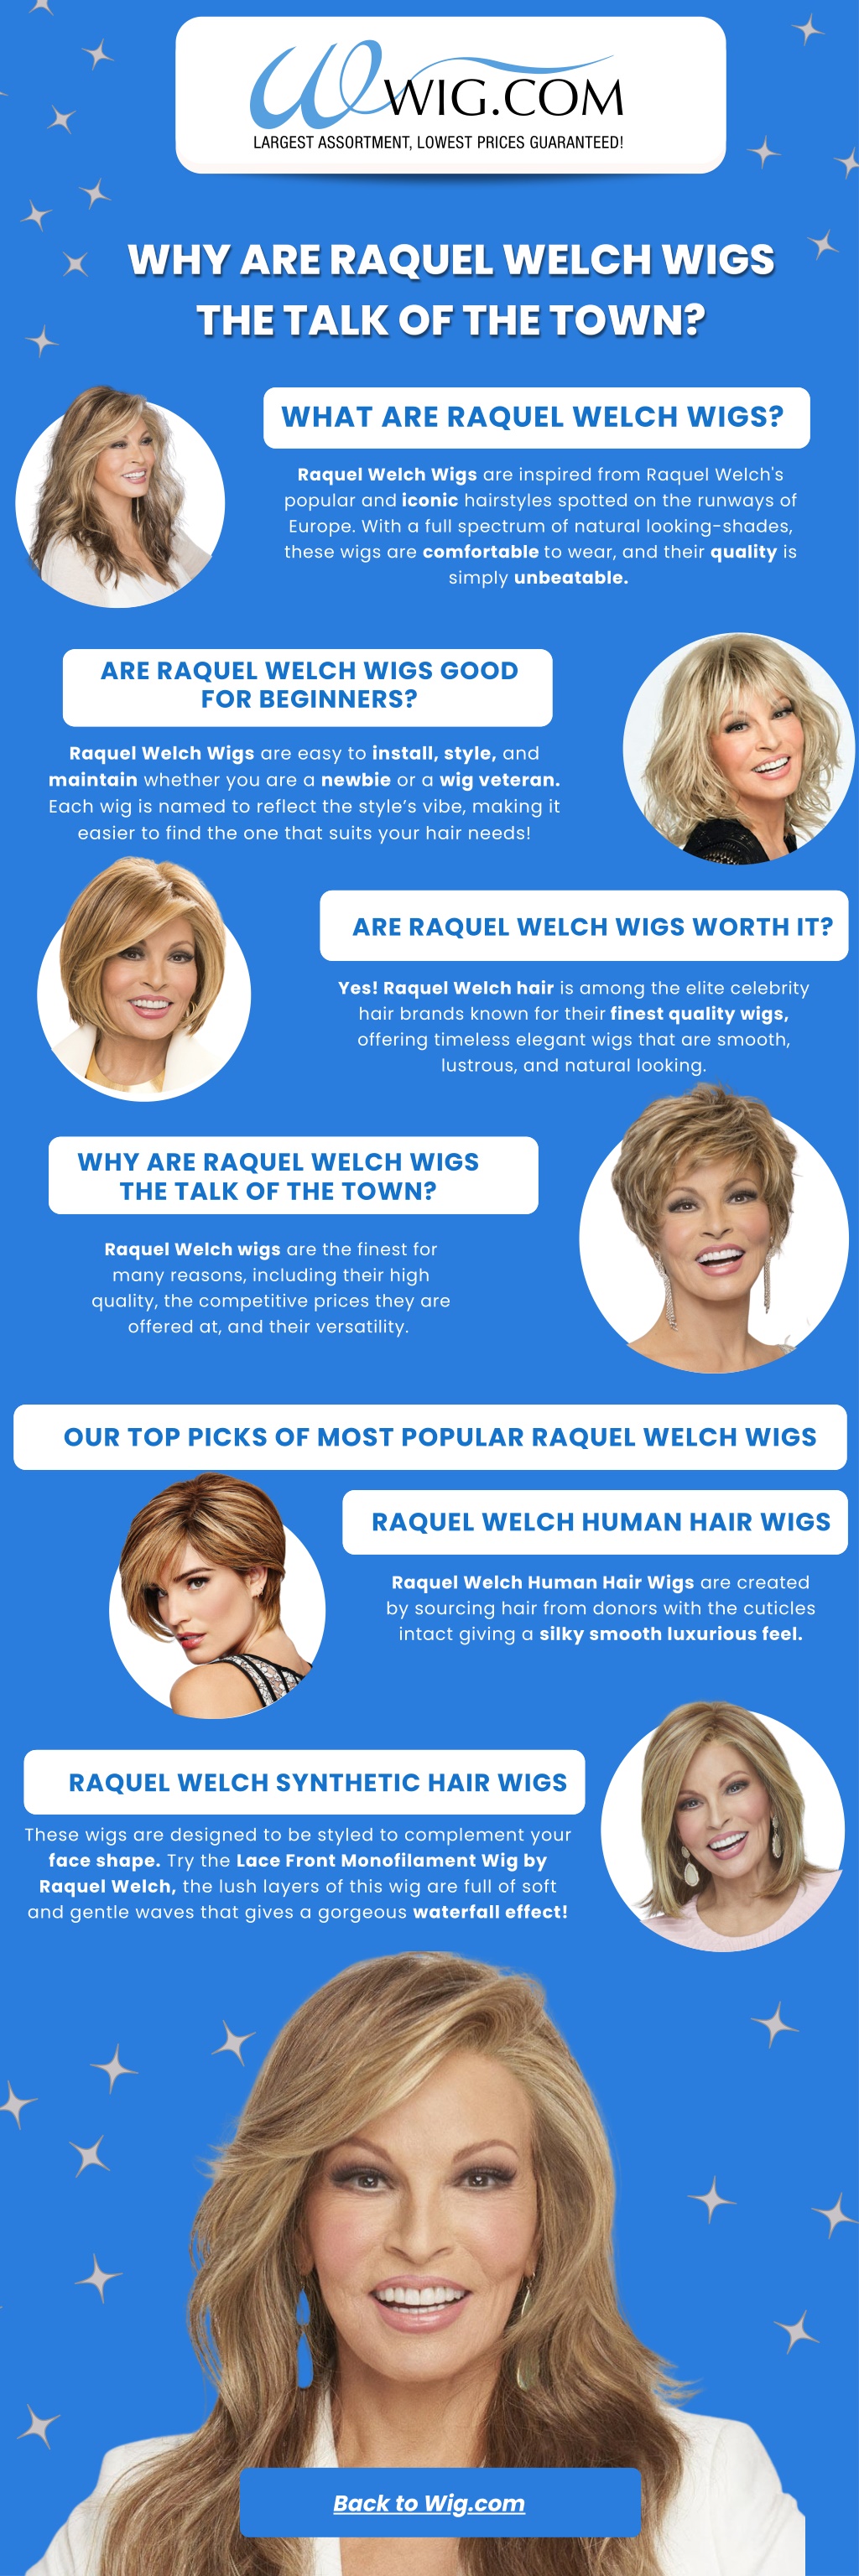 Ppt Why Are Raquel Welch Wigs The Talk Of The Town Powerpoint Presentation Id11687051 